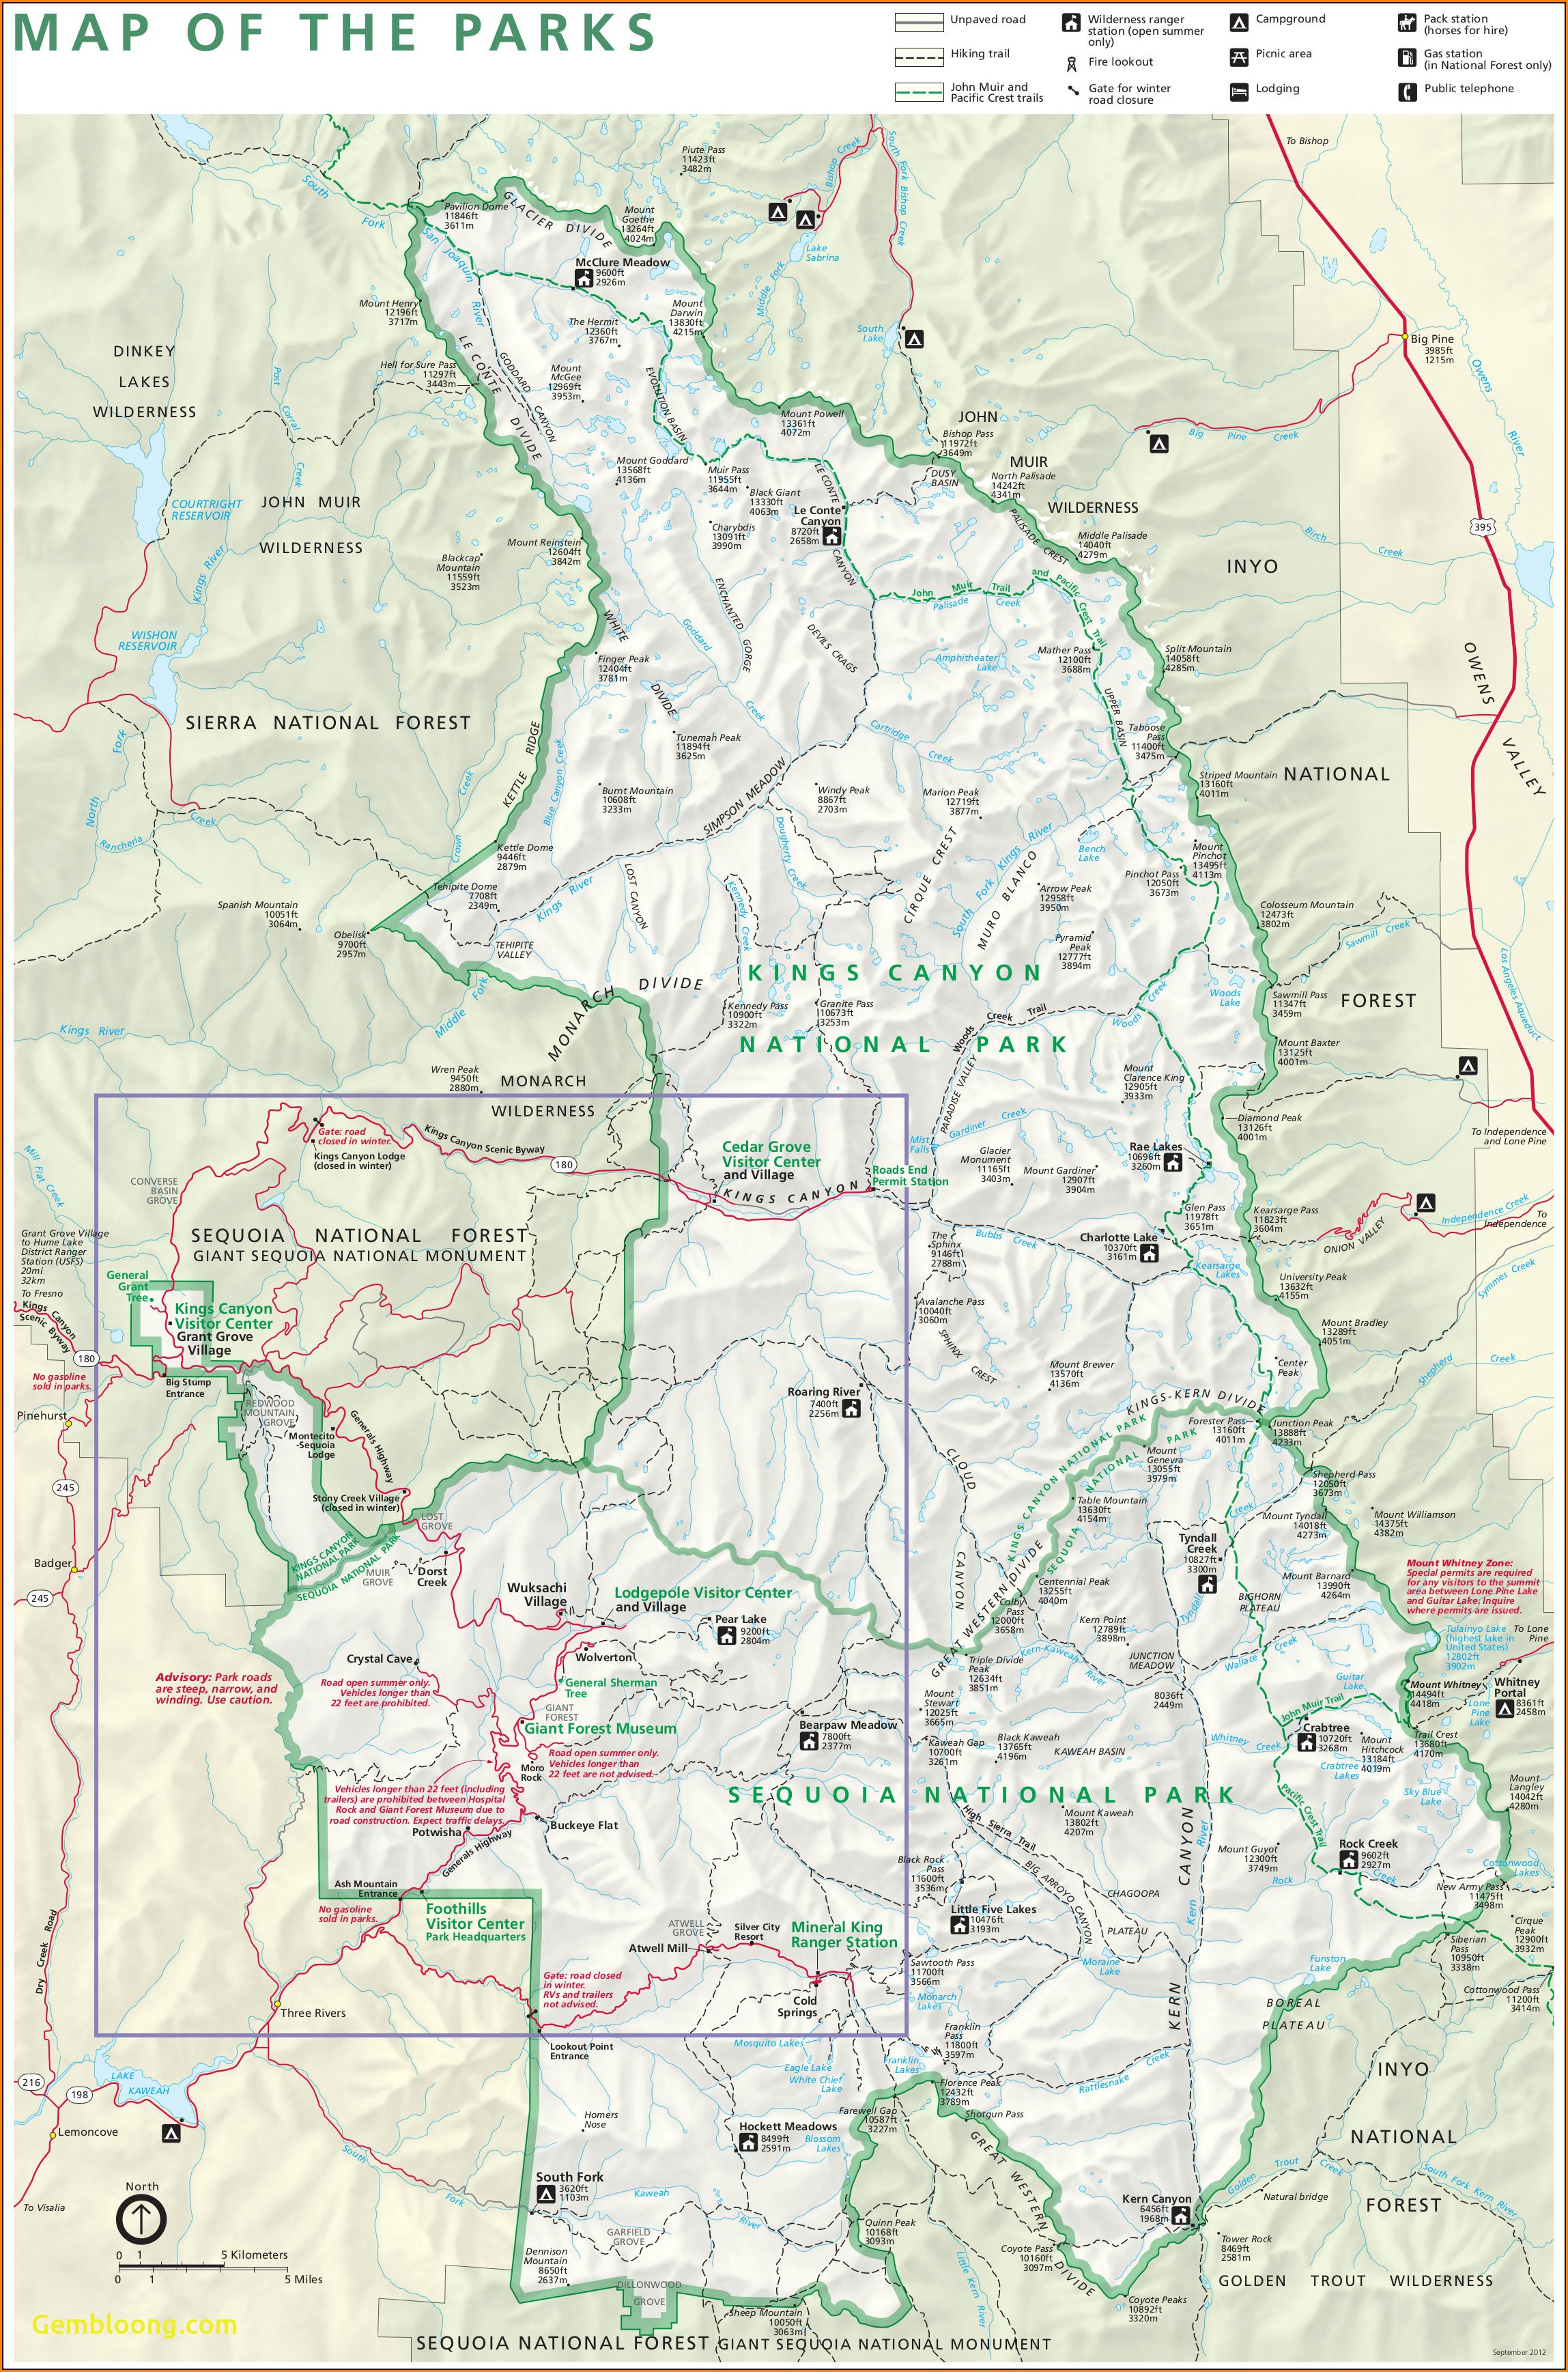 Sequoia Kings Canyon National Park Map